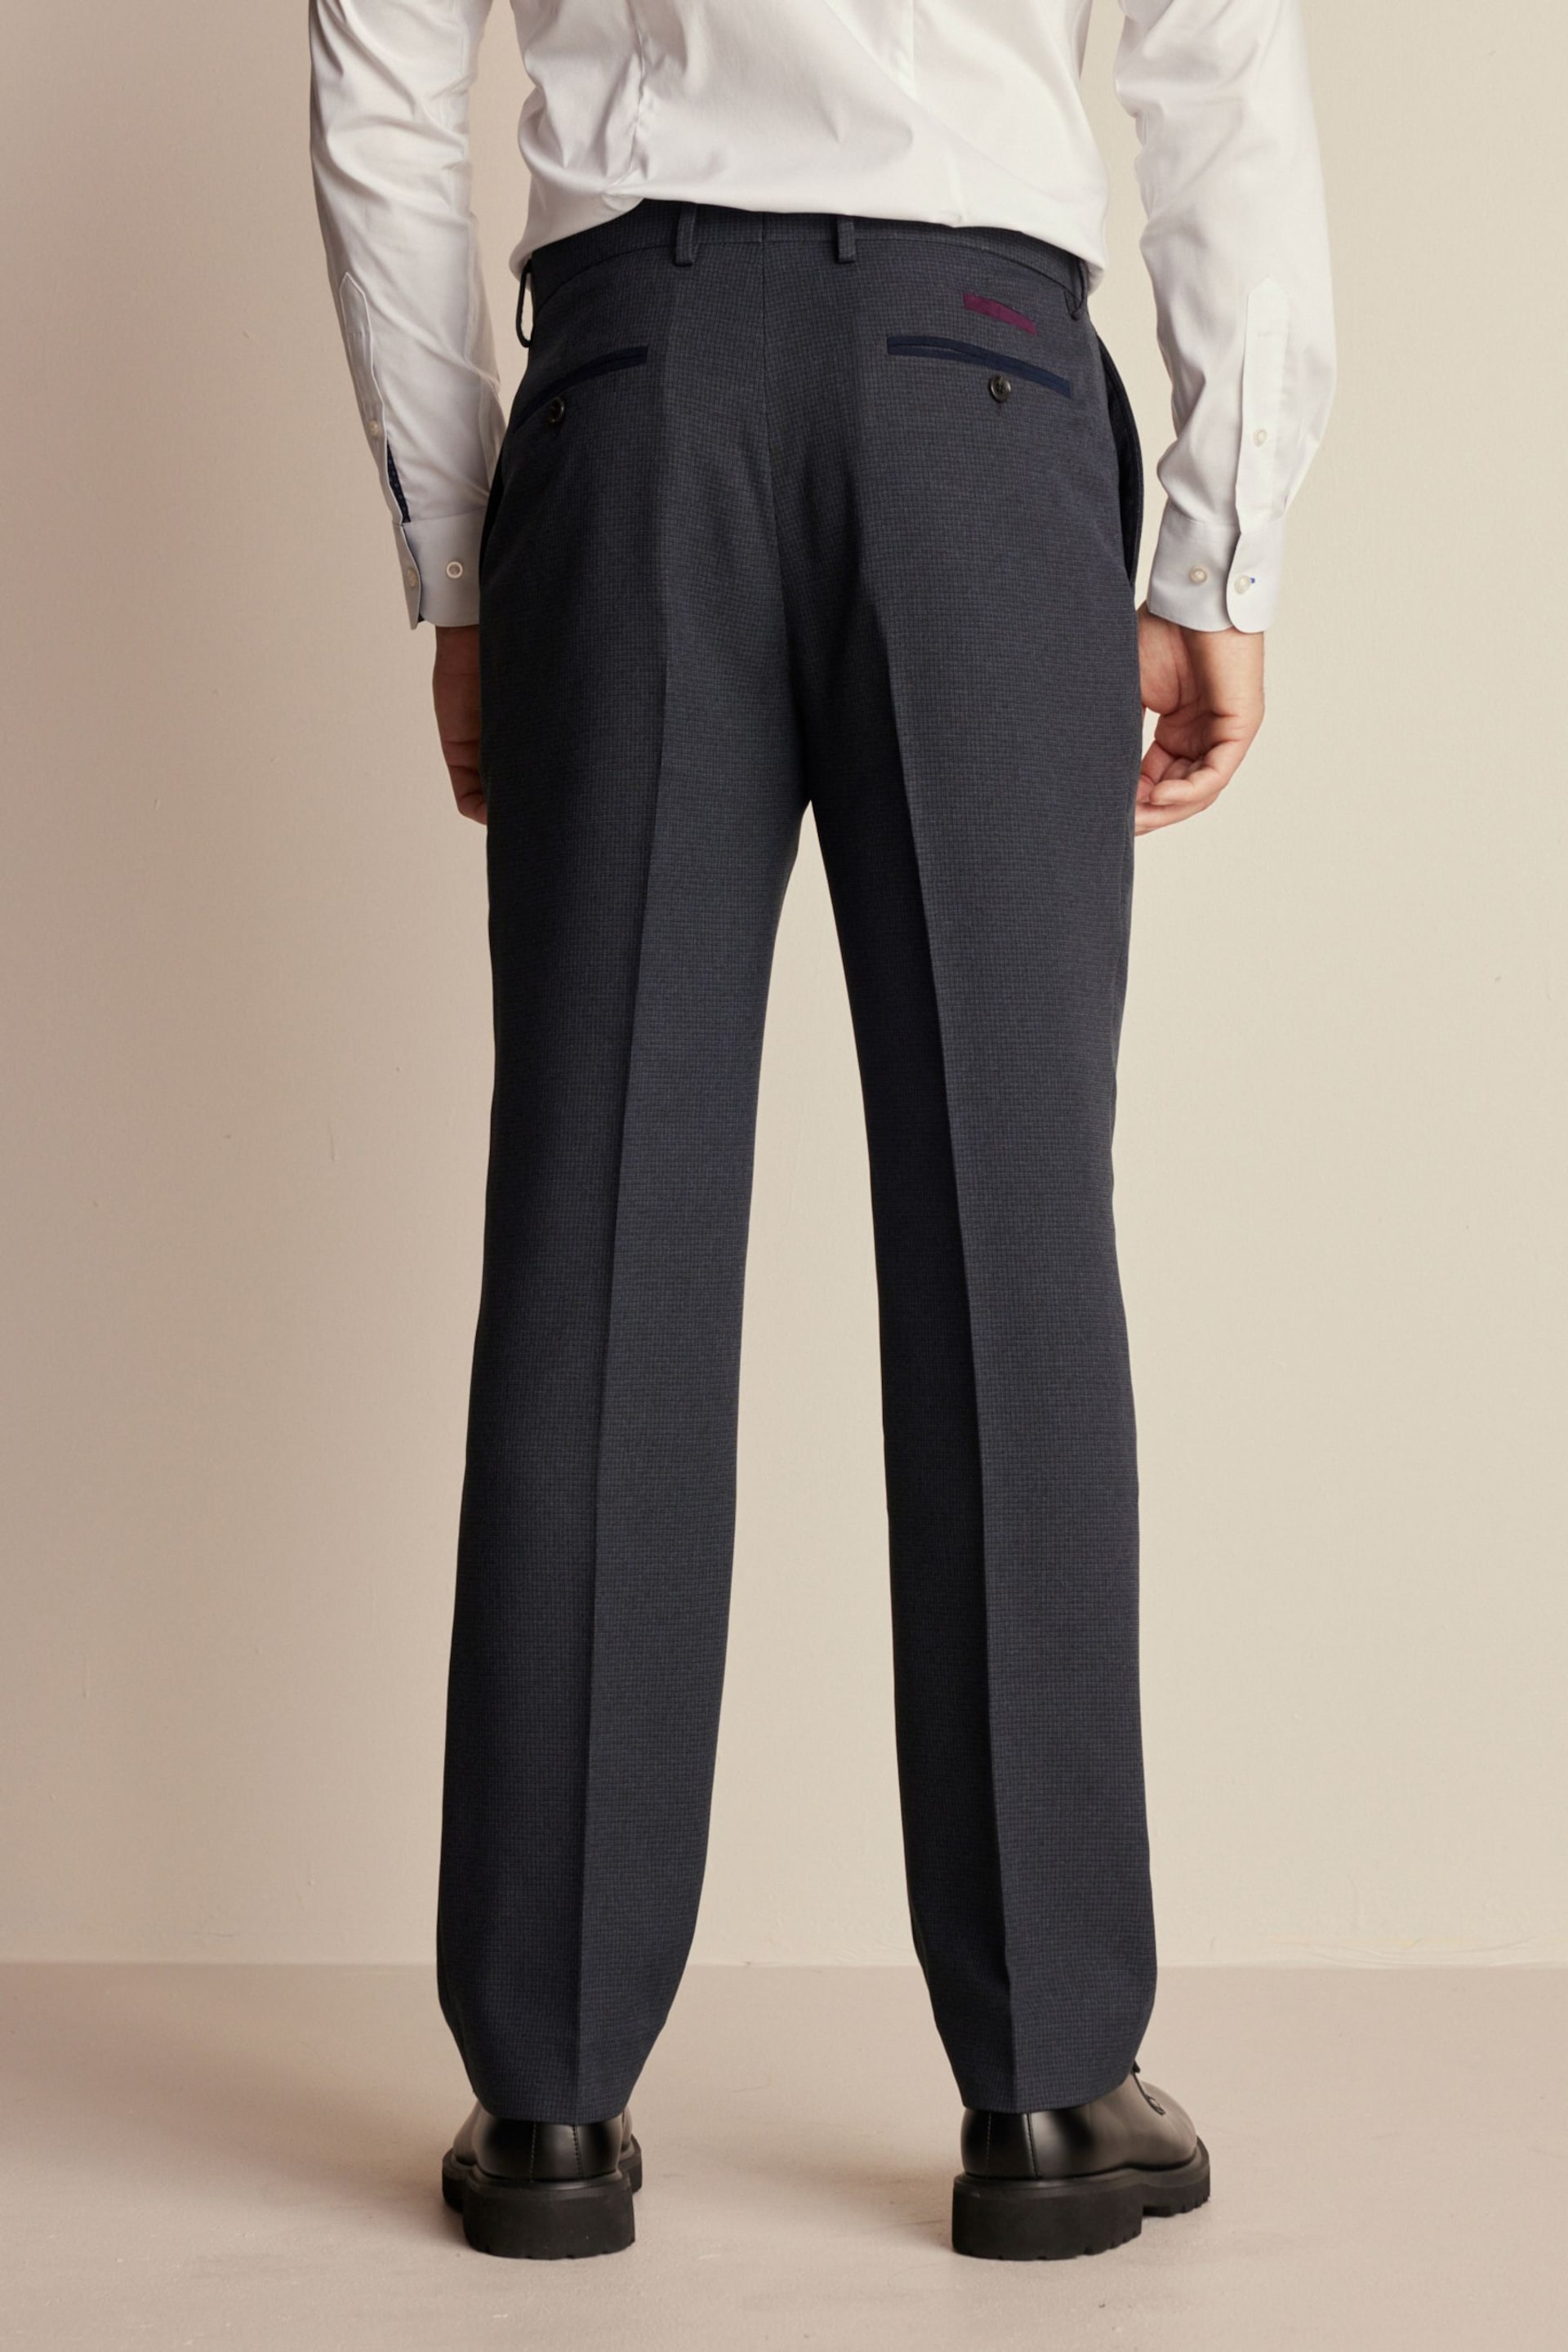 Navy Trimmed Textured Suit Trousers - Image 3 of 9